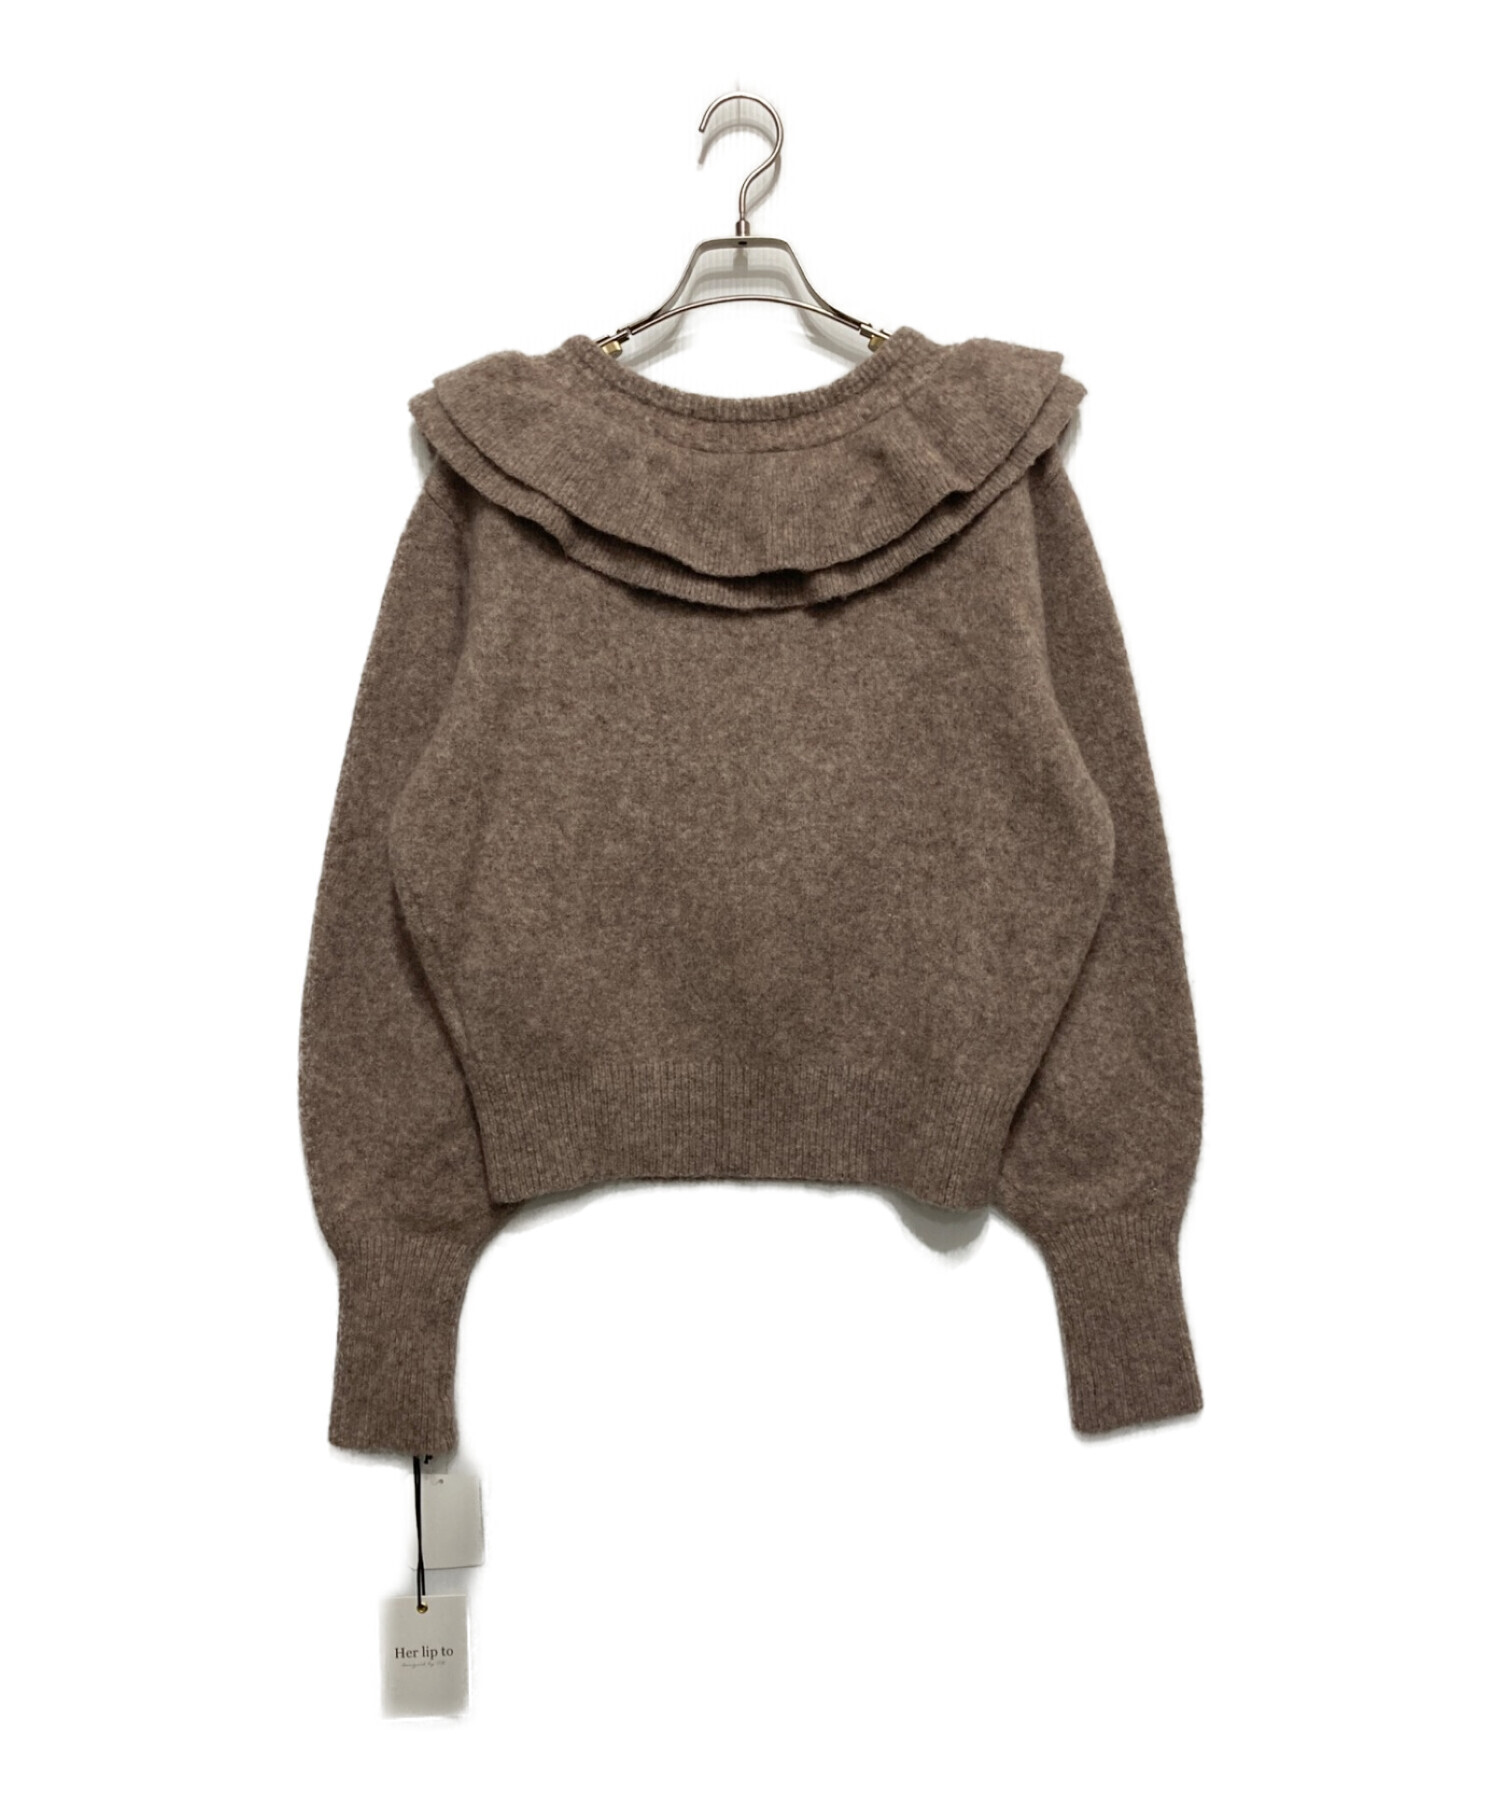 Her lip to (ハーリップトゥ) Lace Up Wool blend Pullover ブラウン サイズ:Free